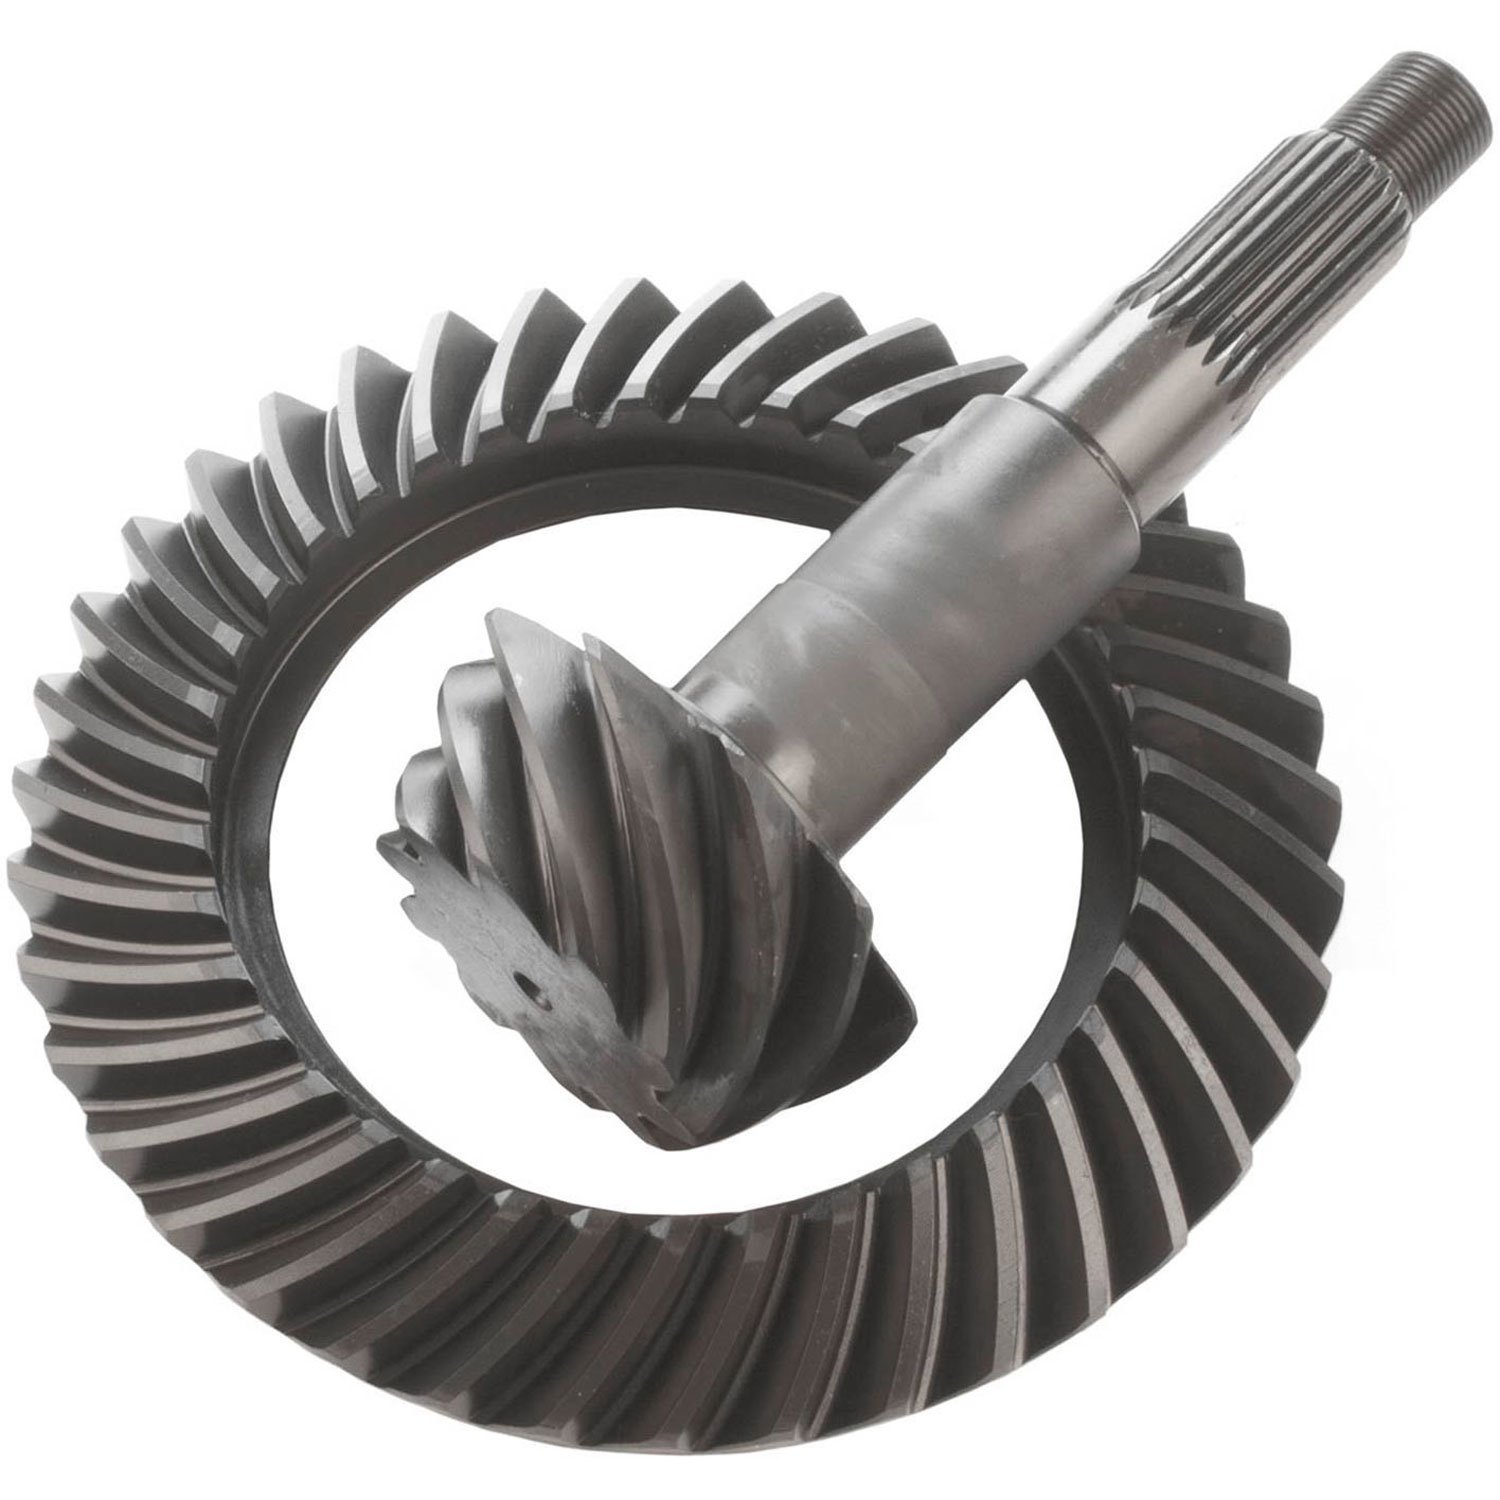 Ring And Pinion